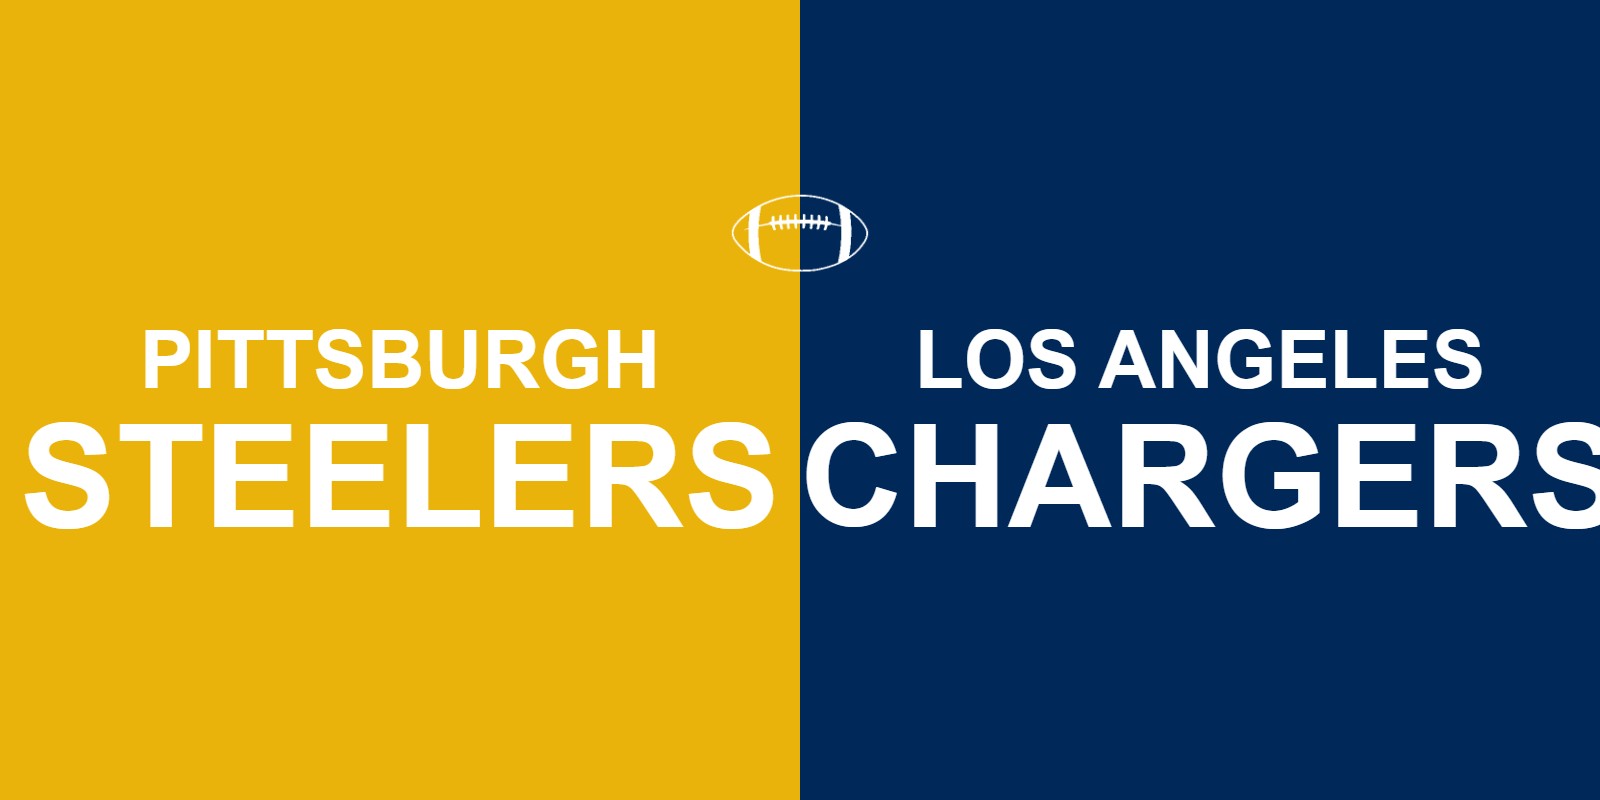 Steelers vs Chargers